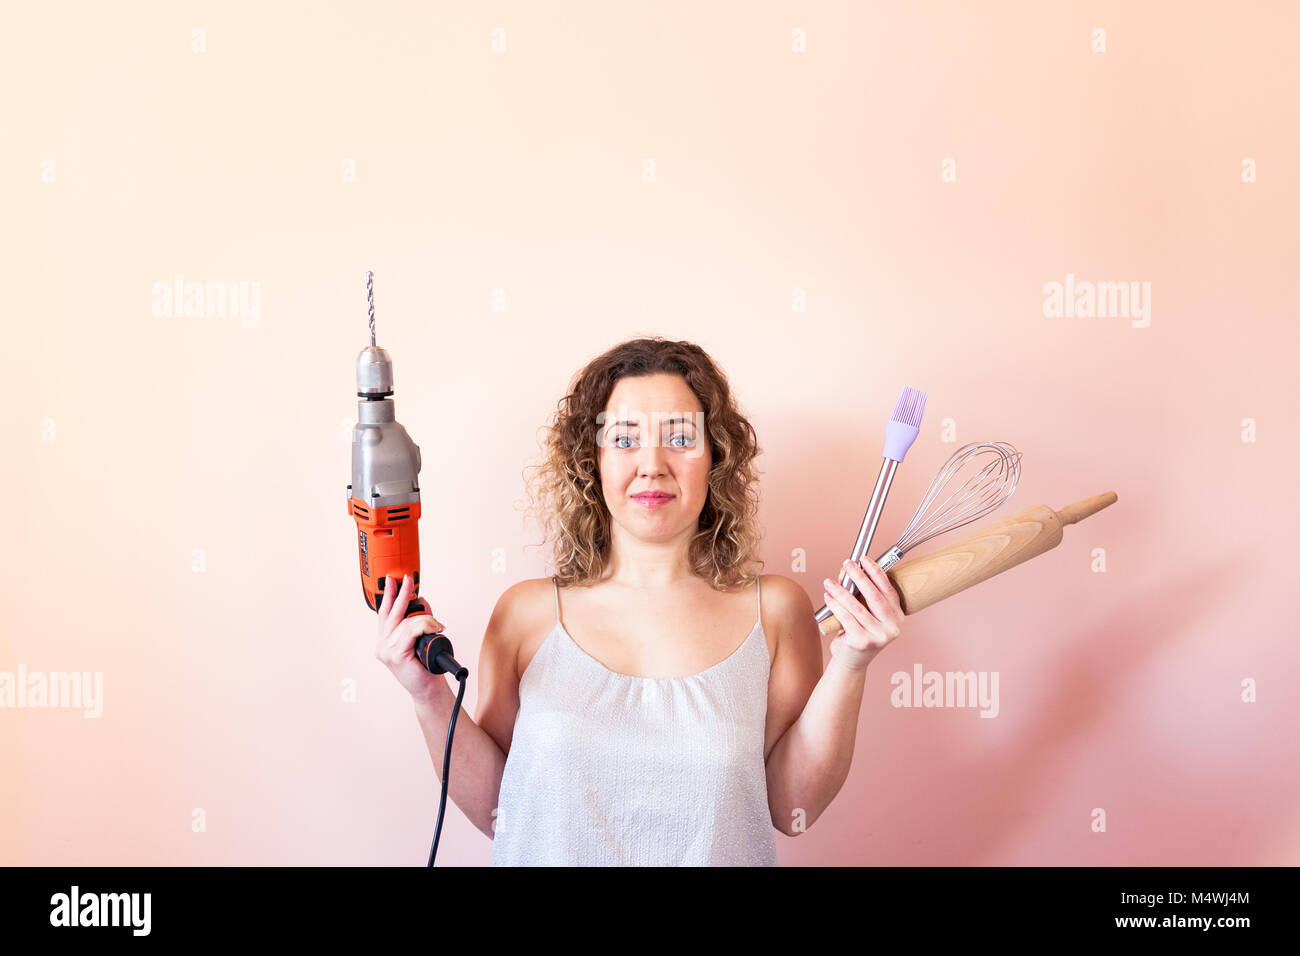 Beautiful curly woman holding man driller and kitchen tools. Gender equality, women's day concept. Stock Photo